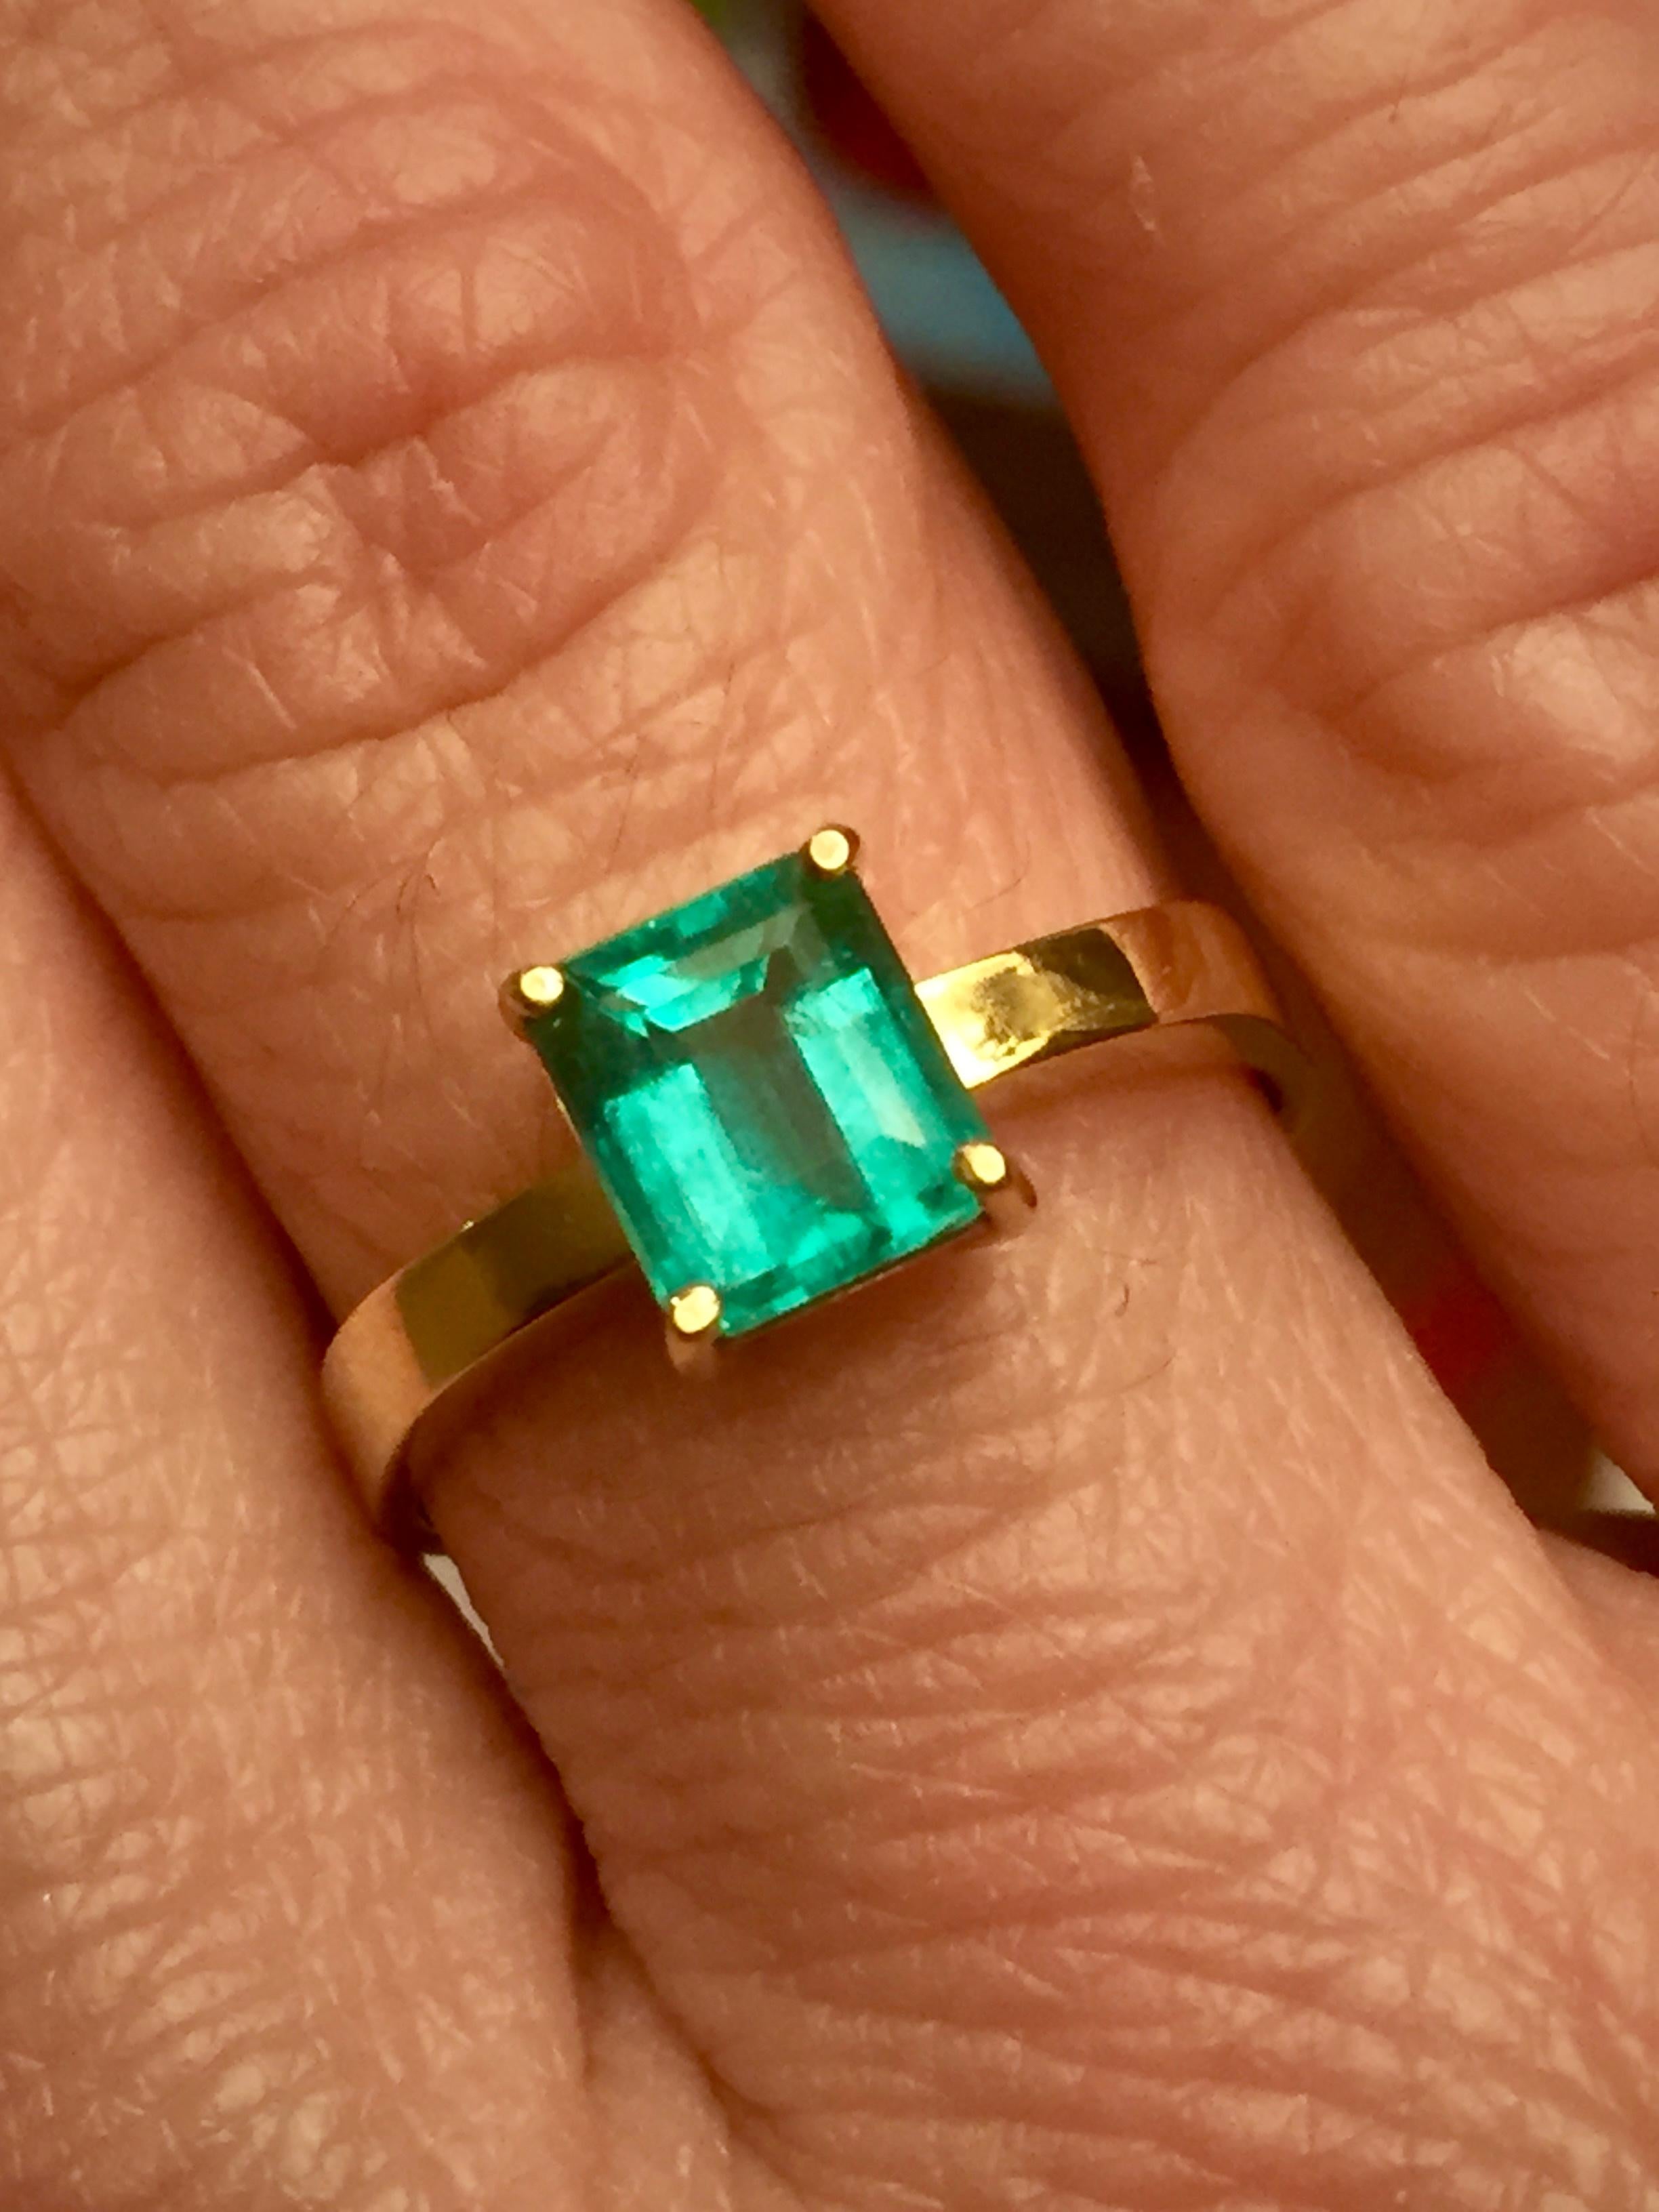 1.00 Carat Colombian Emerald Solitaire Engagement Ring 18K Yellow Gold
This is a Gorgeous Emerald Solitaire Ring 
Four Prong Mounting
Feature one Genuine and 100% natural Colombian emerald emerald cut 
Weighting 1.00 carat
The emerald is the color